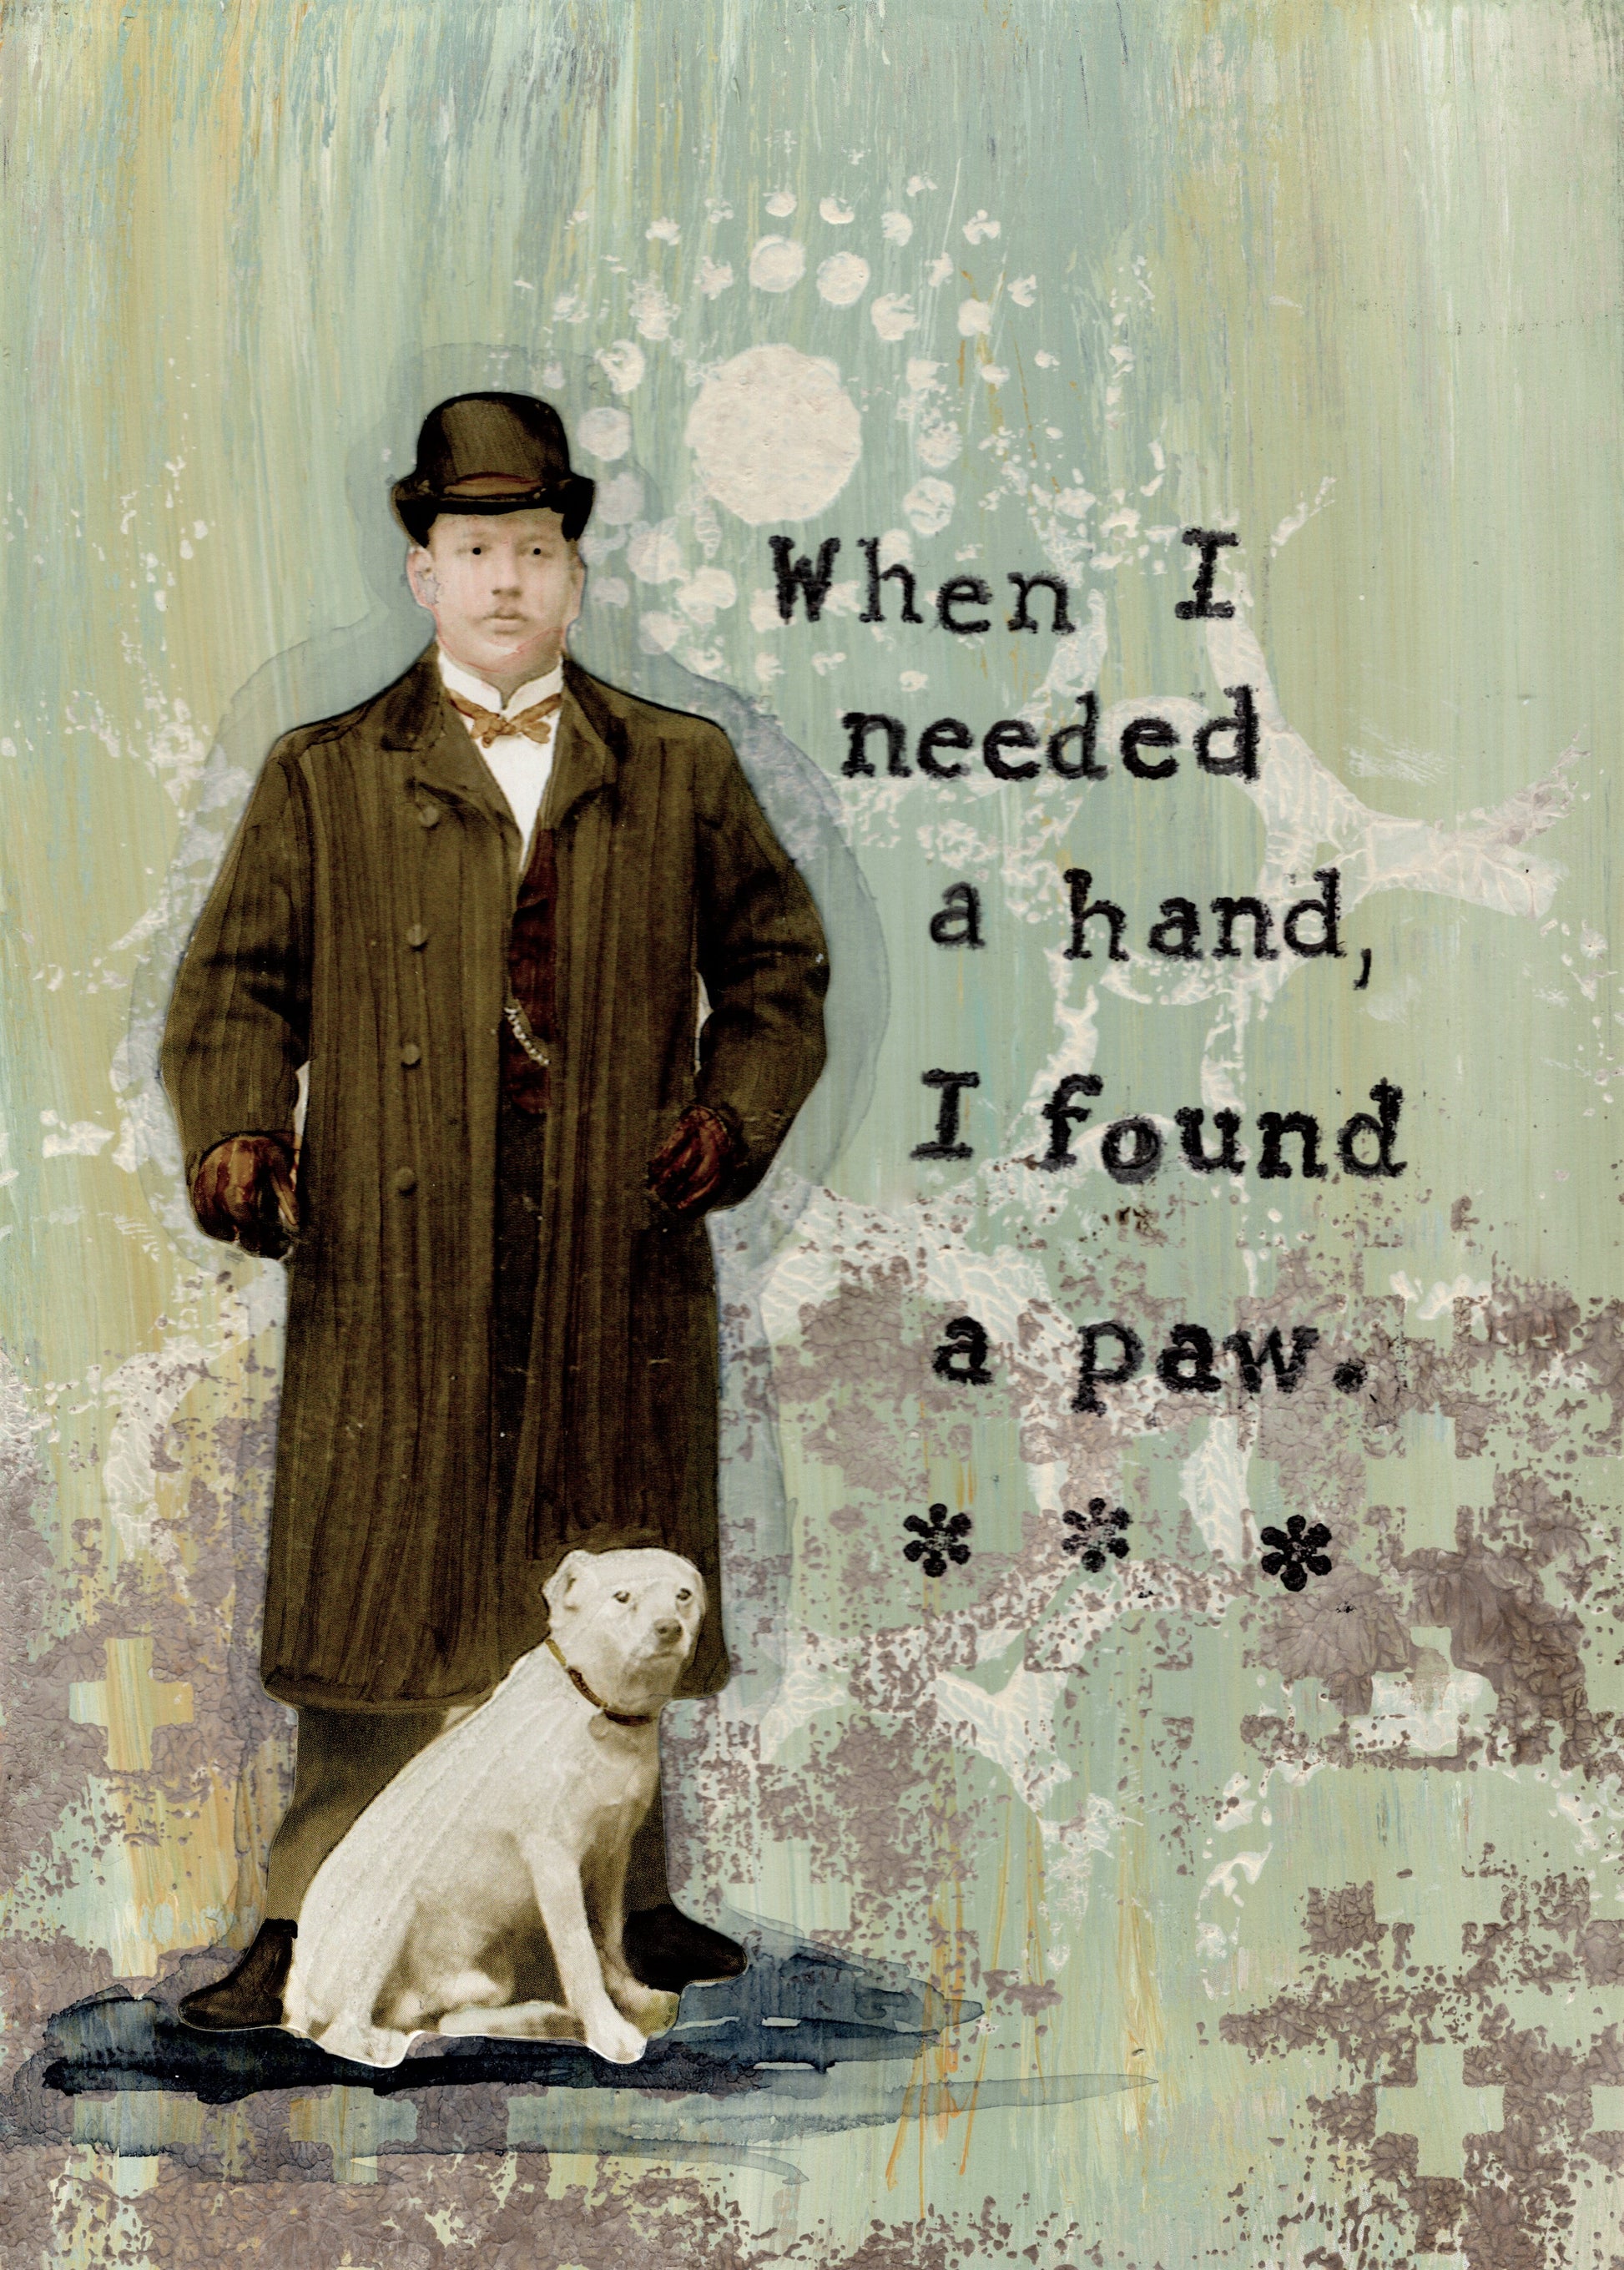 When I needed a hand I found a paw.